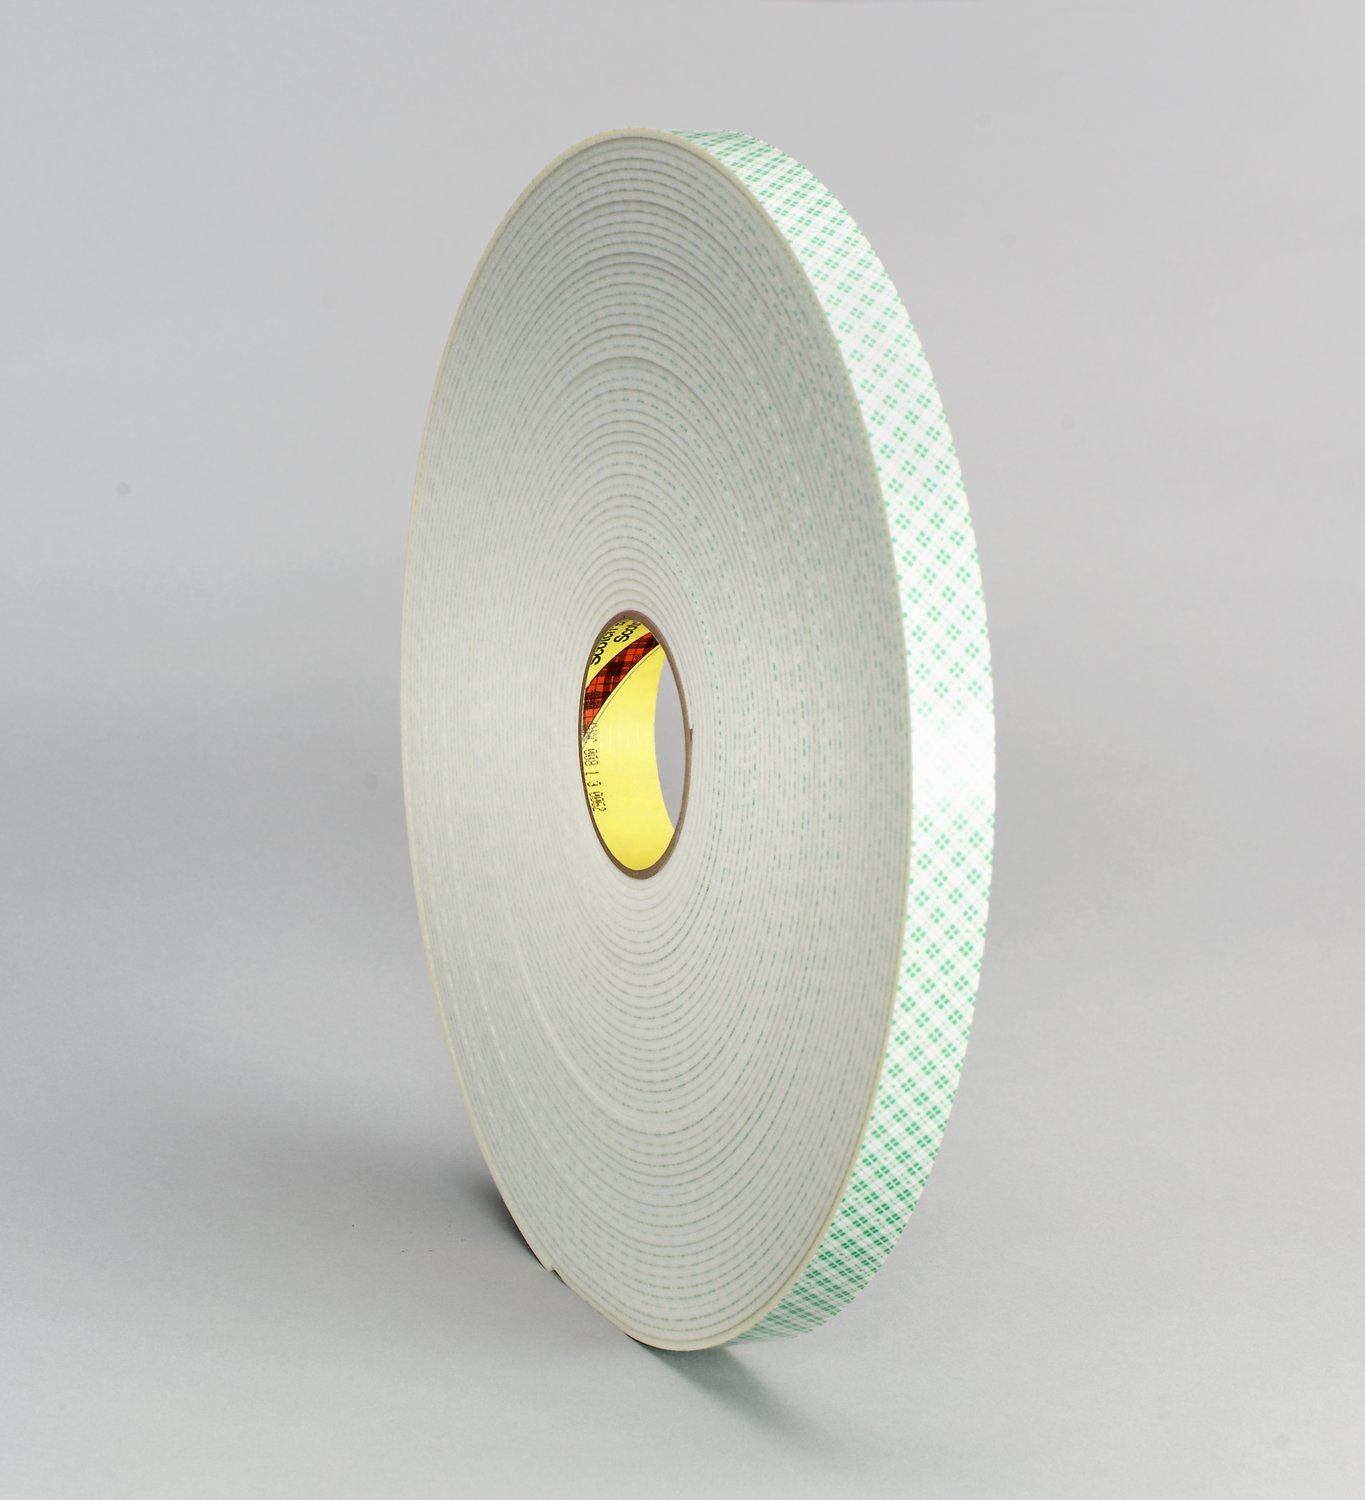 7000122488 - 3M Double Coated Urethane Foam Tape 4008, Off White, 1 1/2 in x 36 yd,
125 mil, 6 rolls per case